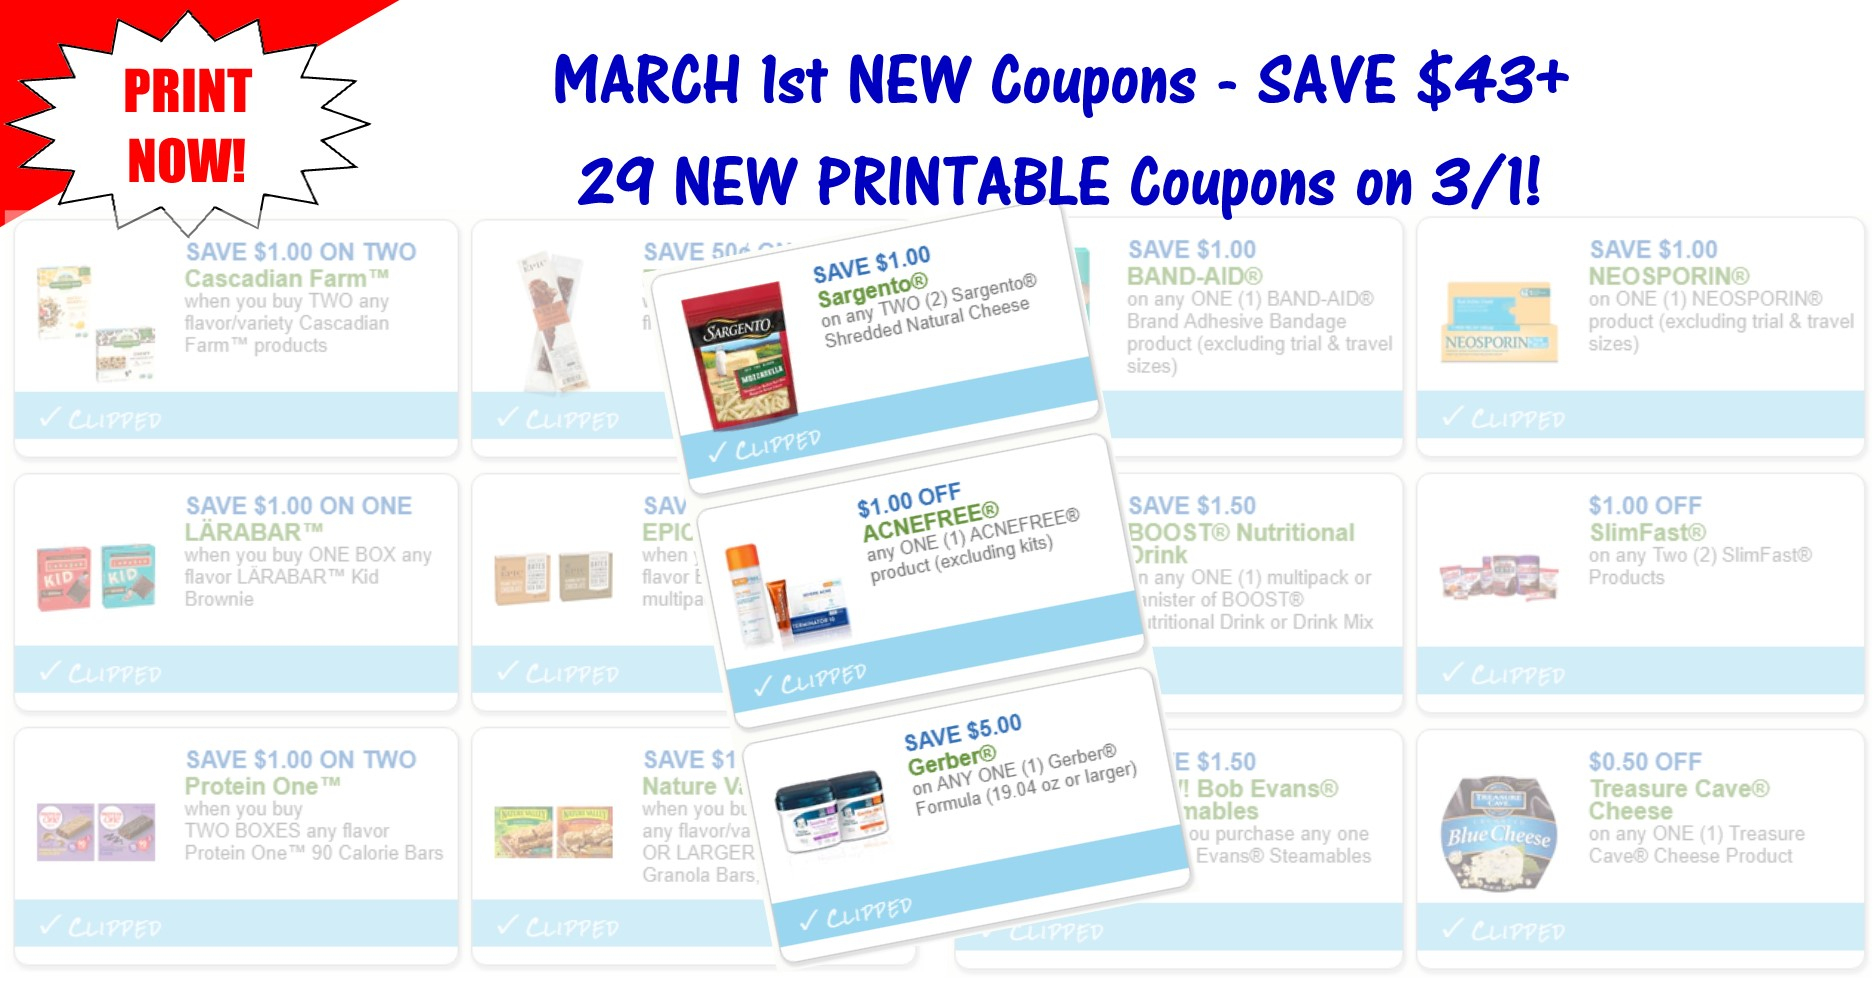 29 New Printable Coupons ~ March 1St New Coupons! - Acne Free Coupons Printable